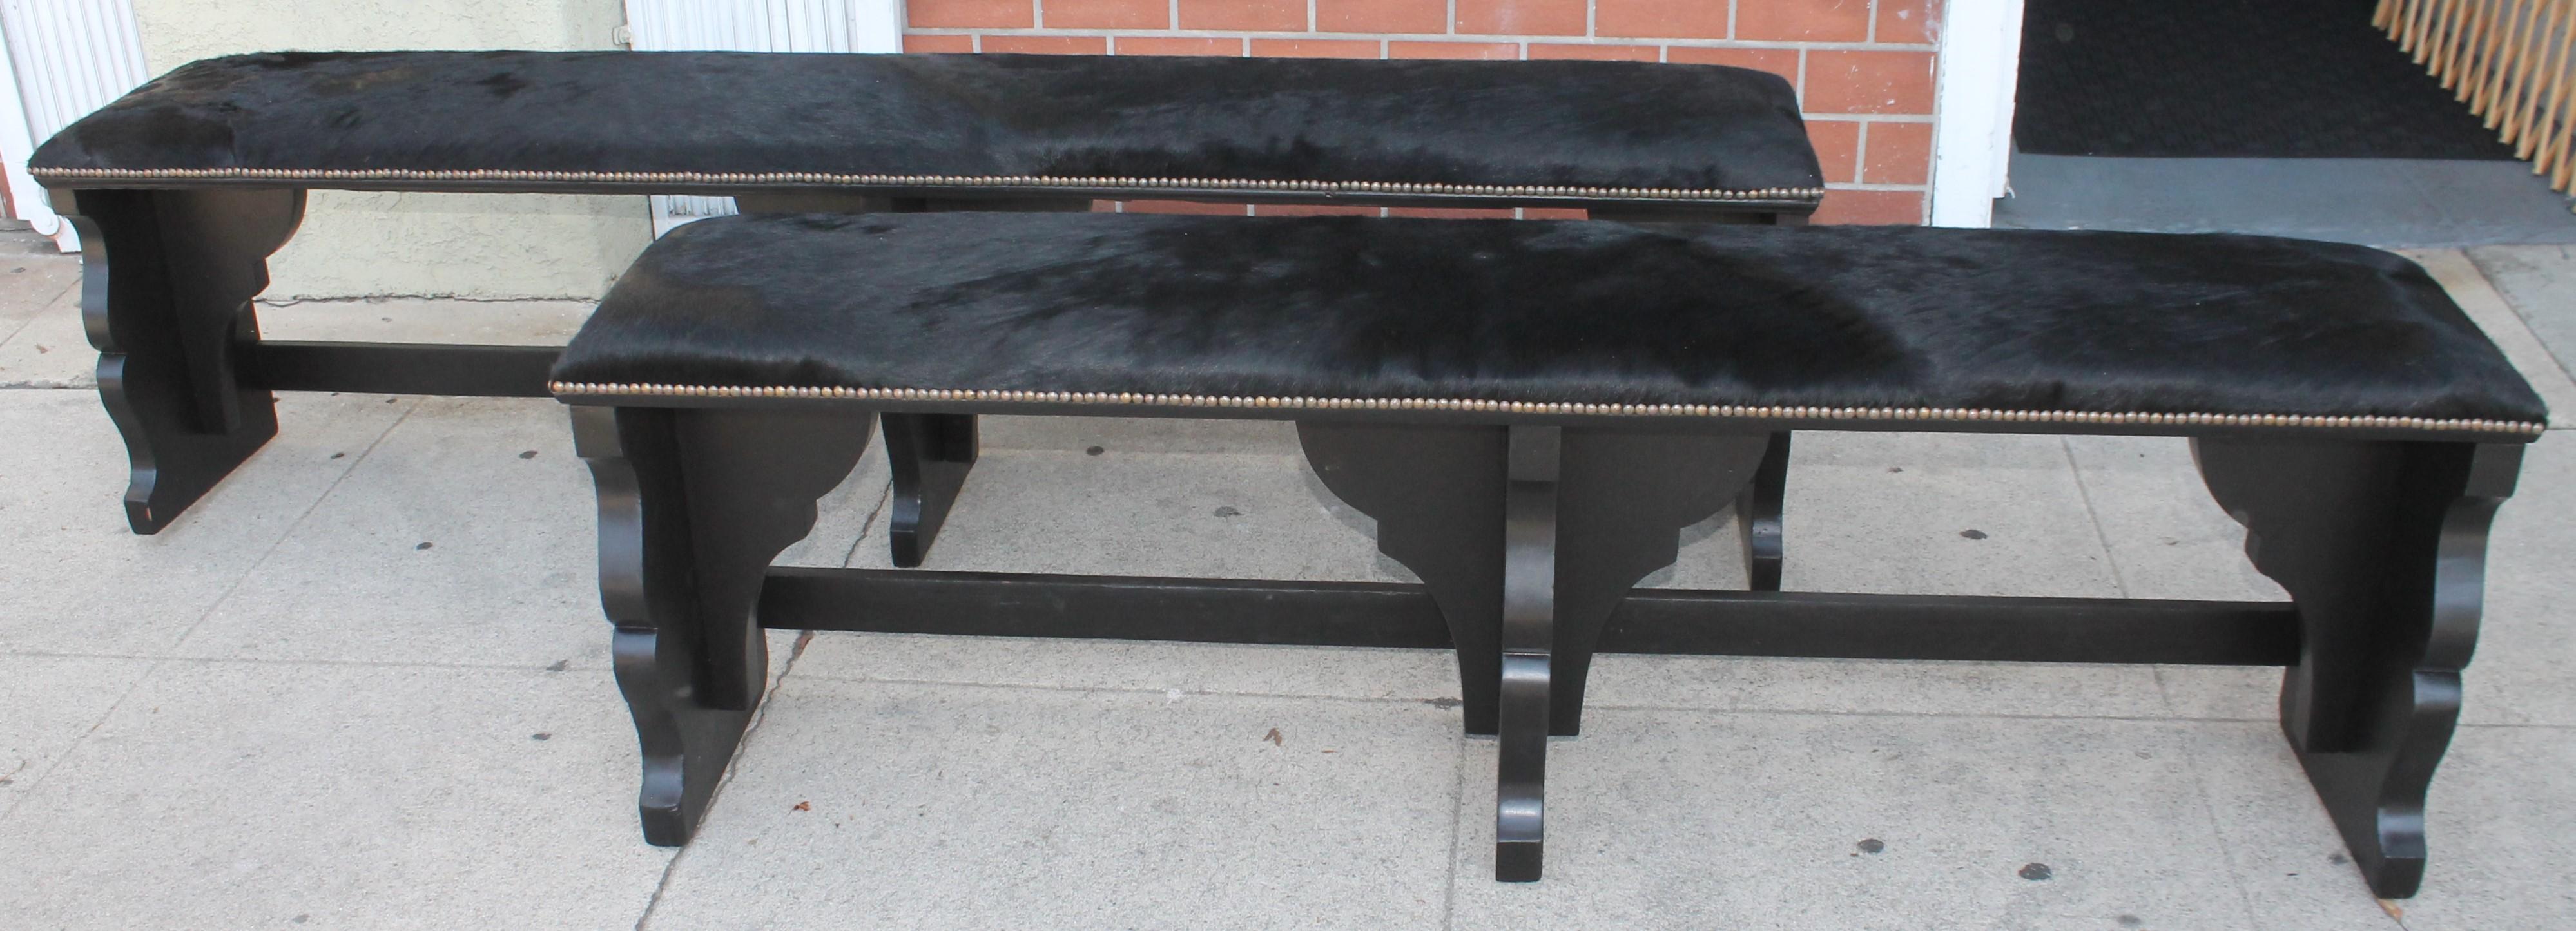 Pair of cowhide covered benches with brass tacks trim. They are painted 20Thc black paint. The two are in fantastic condition.
large Bench Measures -
81w x 14.5 deep x 21 seat height

smaller bench measures 
70w x 14 deep x 21 seat